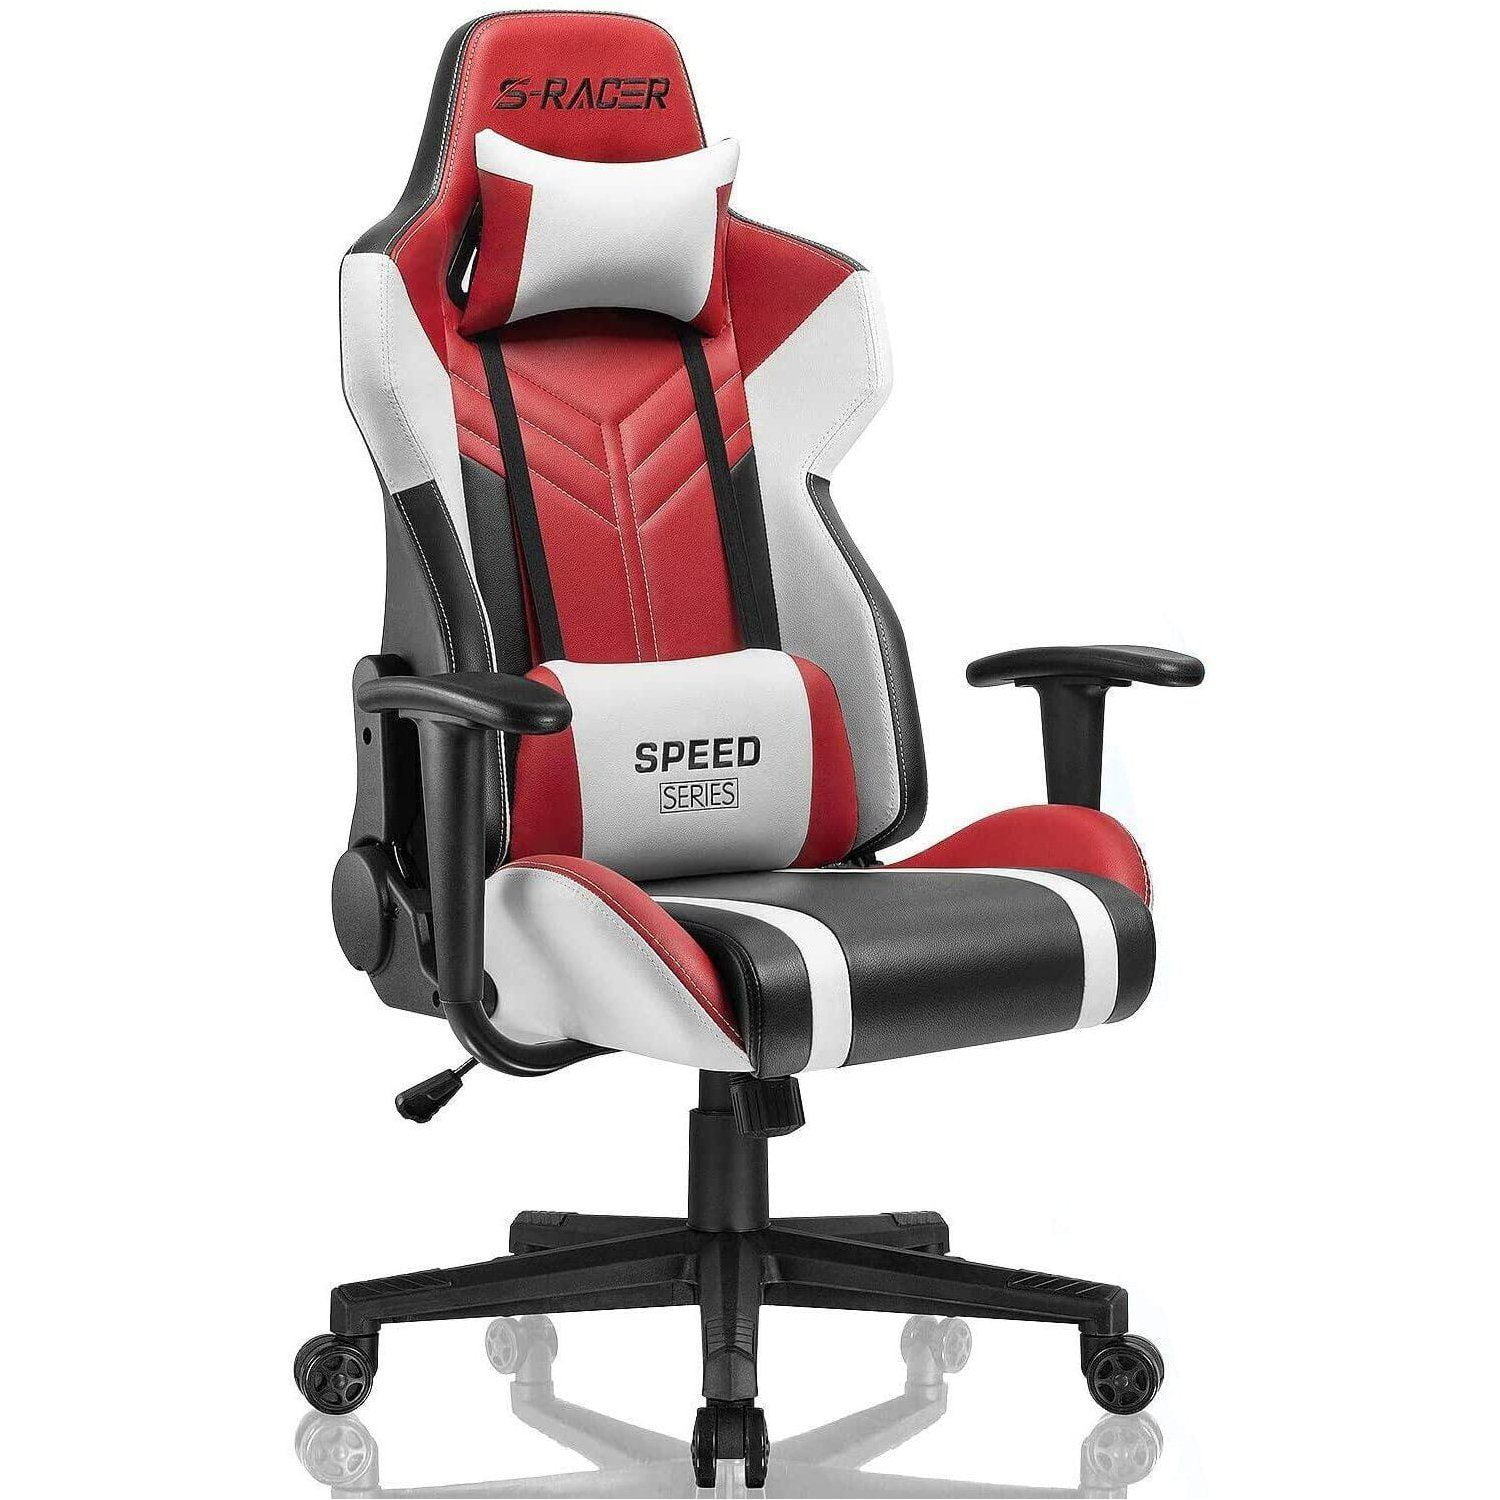 Carbon Fiber New Gaming Floor Chair Accessories - China Gaming